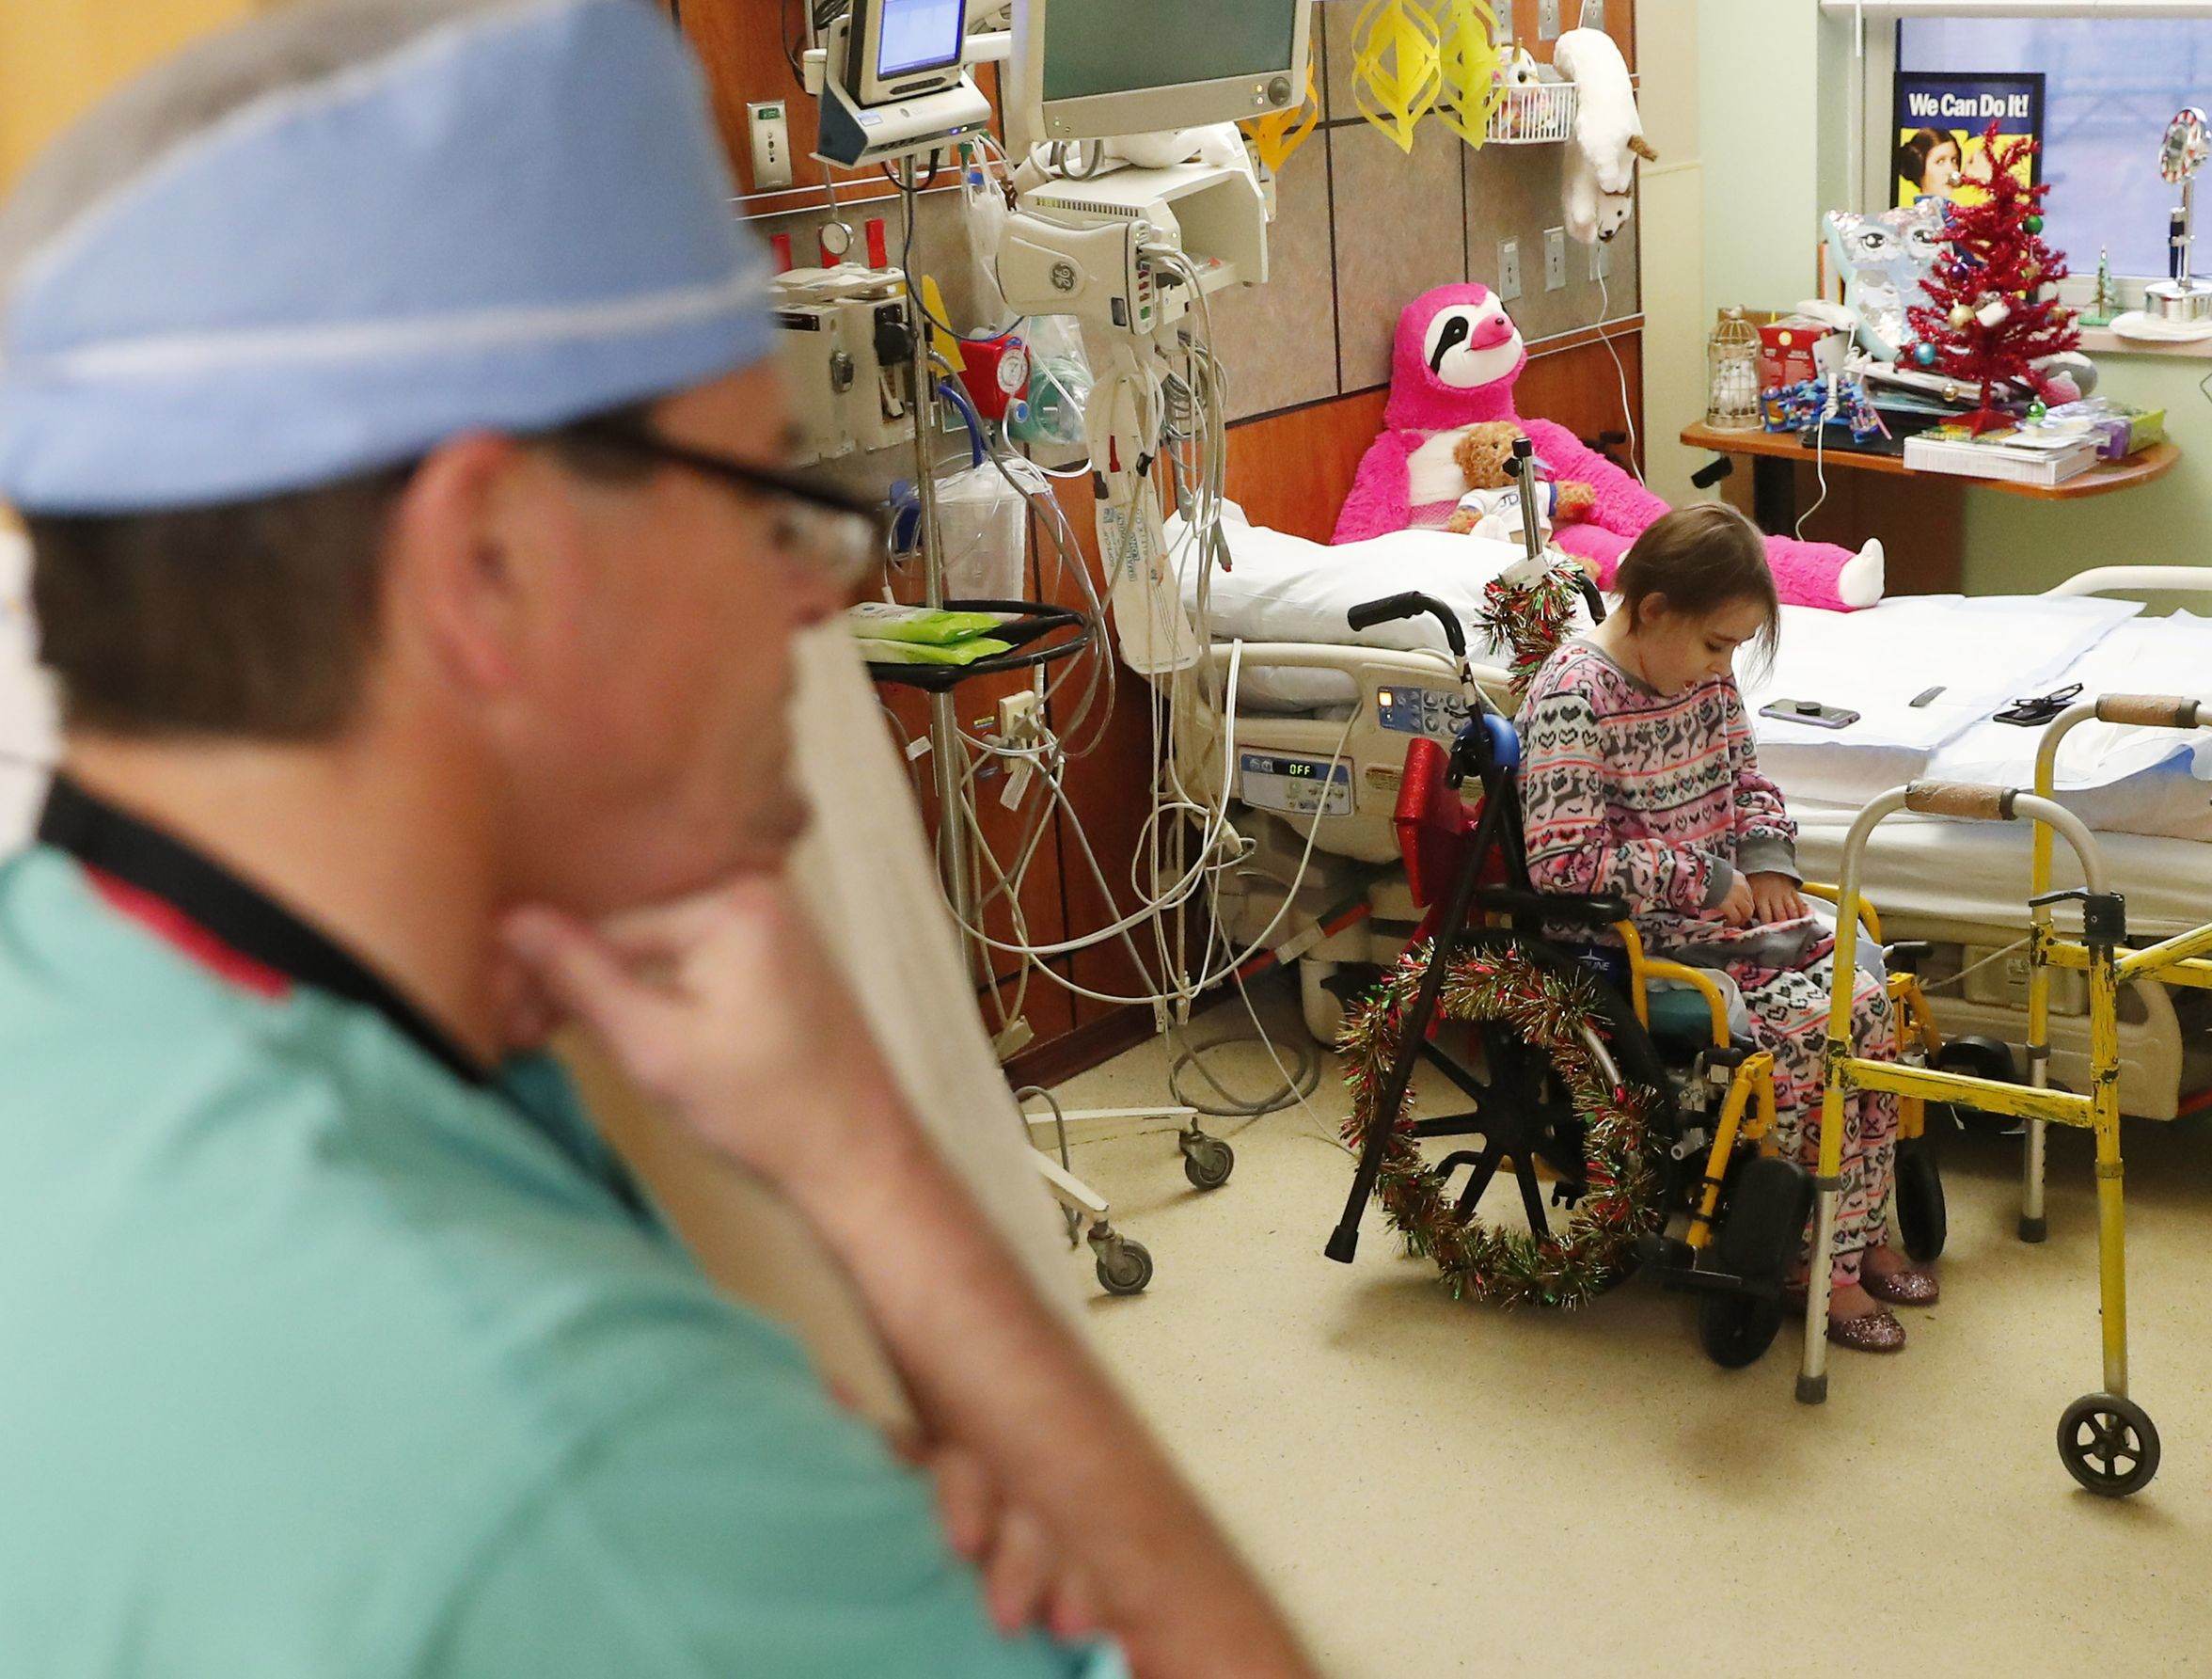 Dr. Kevin Foster talks with Isabella McCune in her room at the Arizona Burn Center in Phoenix Dec. 12, 2018. The 9-year-old was severely burned in a home accident in March.